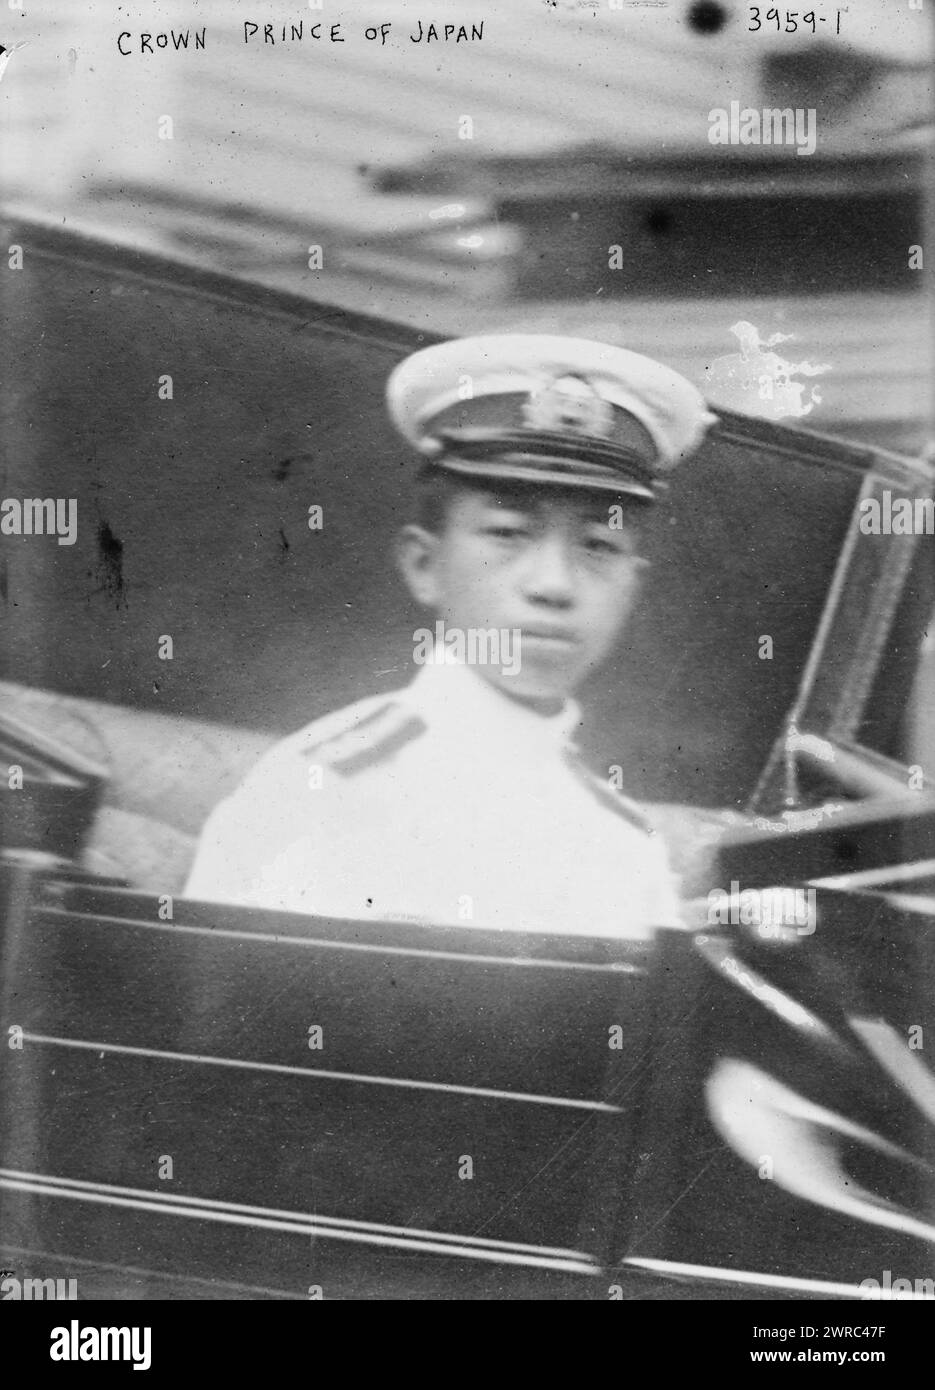 Crown Prince of Japan, Photograph shows Crown Prince Hirohito (1901-1989) who later became Emperor Showa of Japan (1901-1989) (Hirohito) who reigned from 1926-1989., ca. 1921, Glass negatives, 1 negative: glass Stock Photo